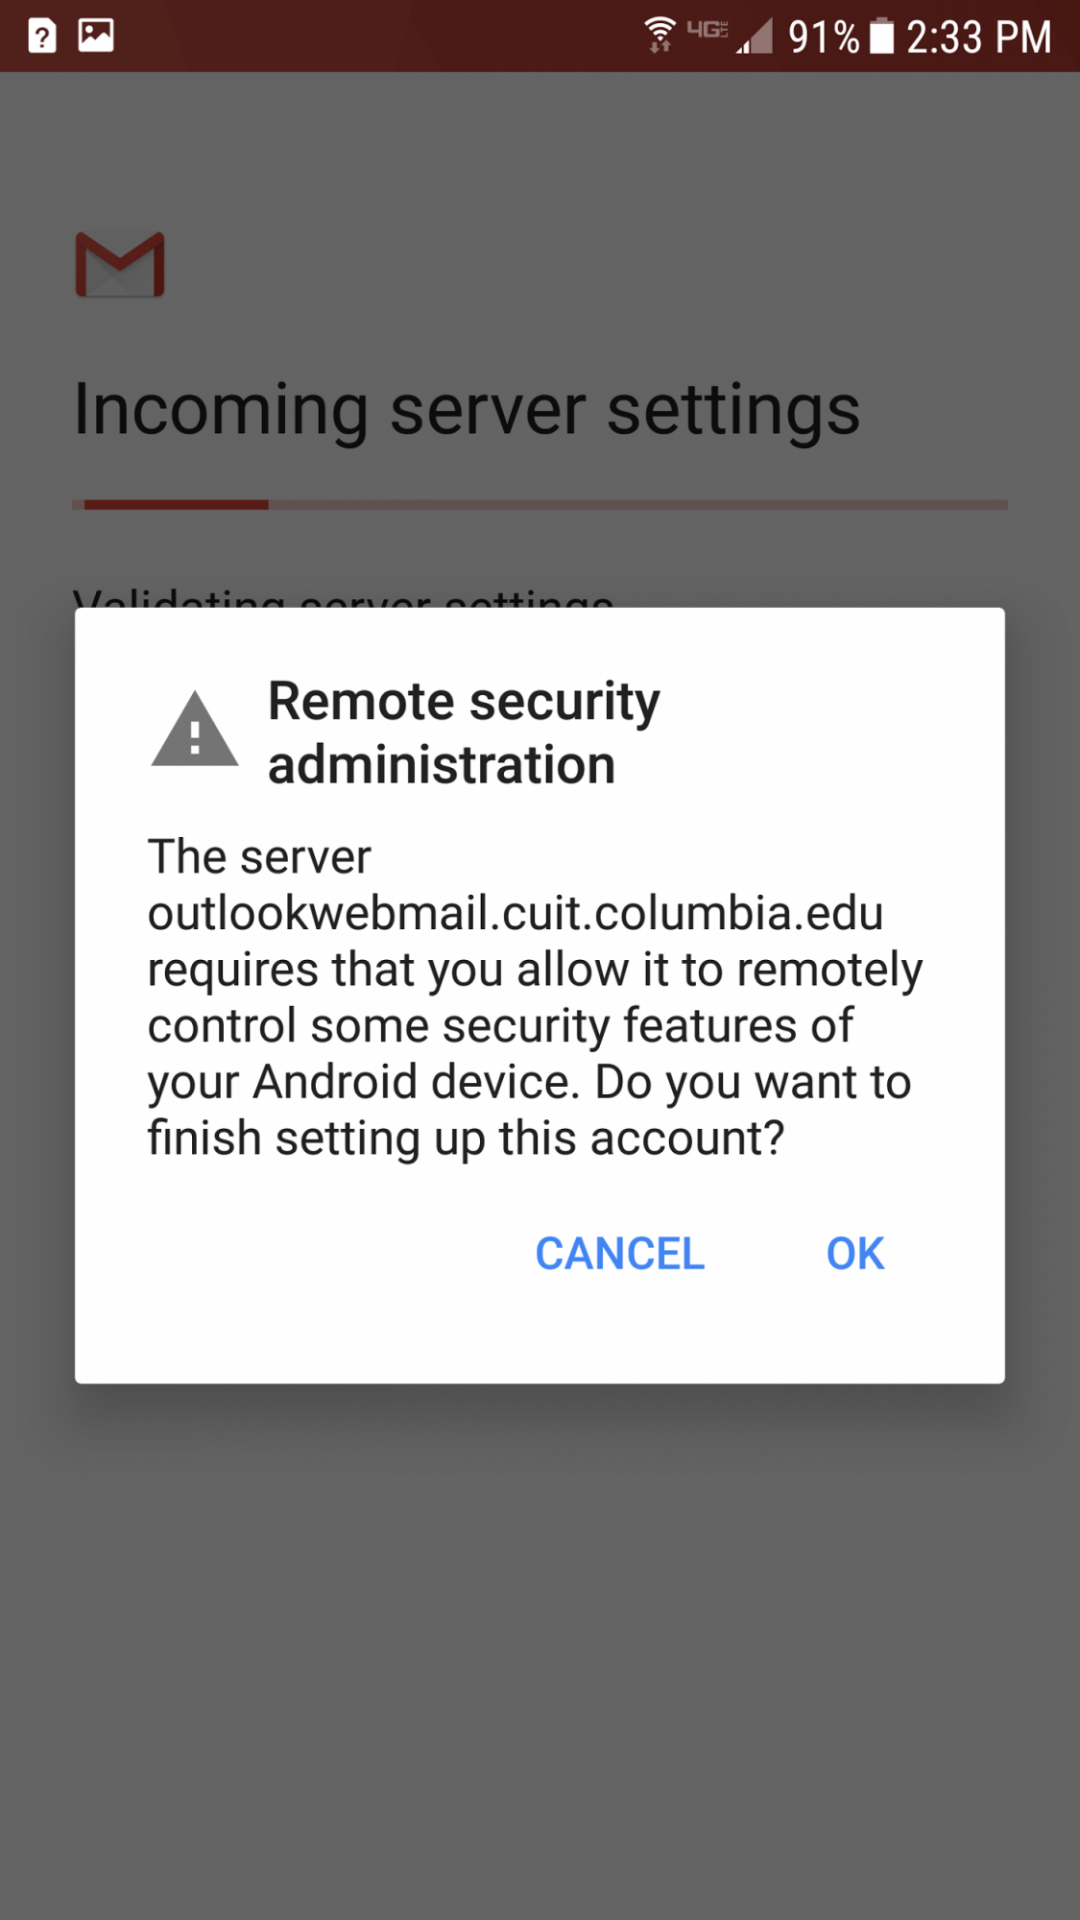 Remote security administration pop-up